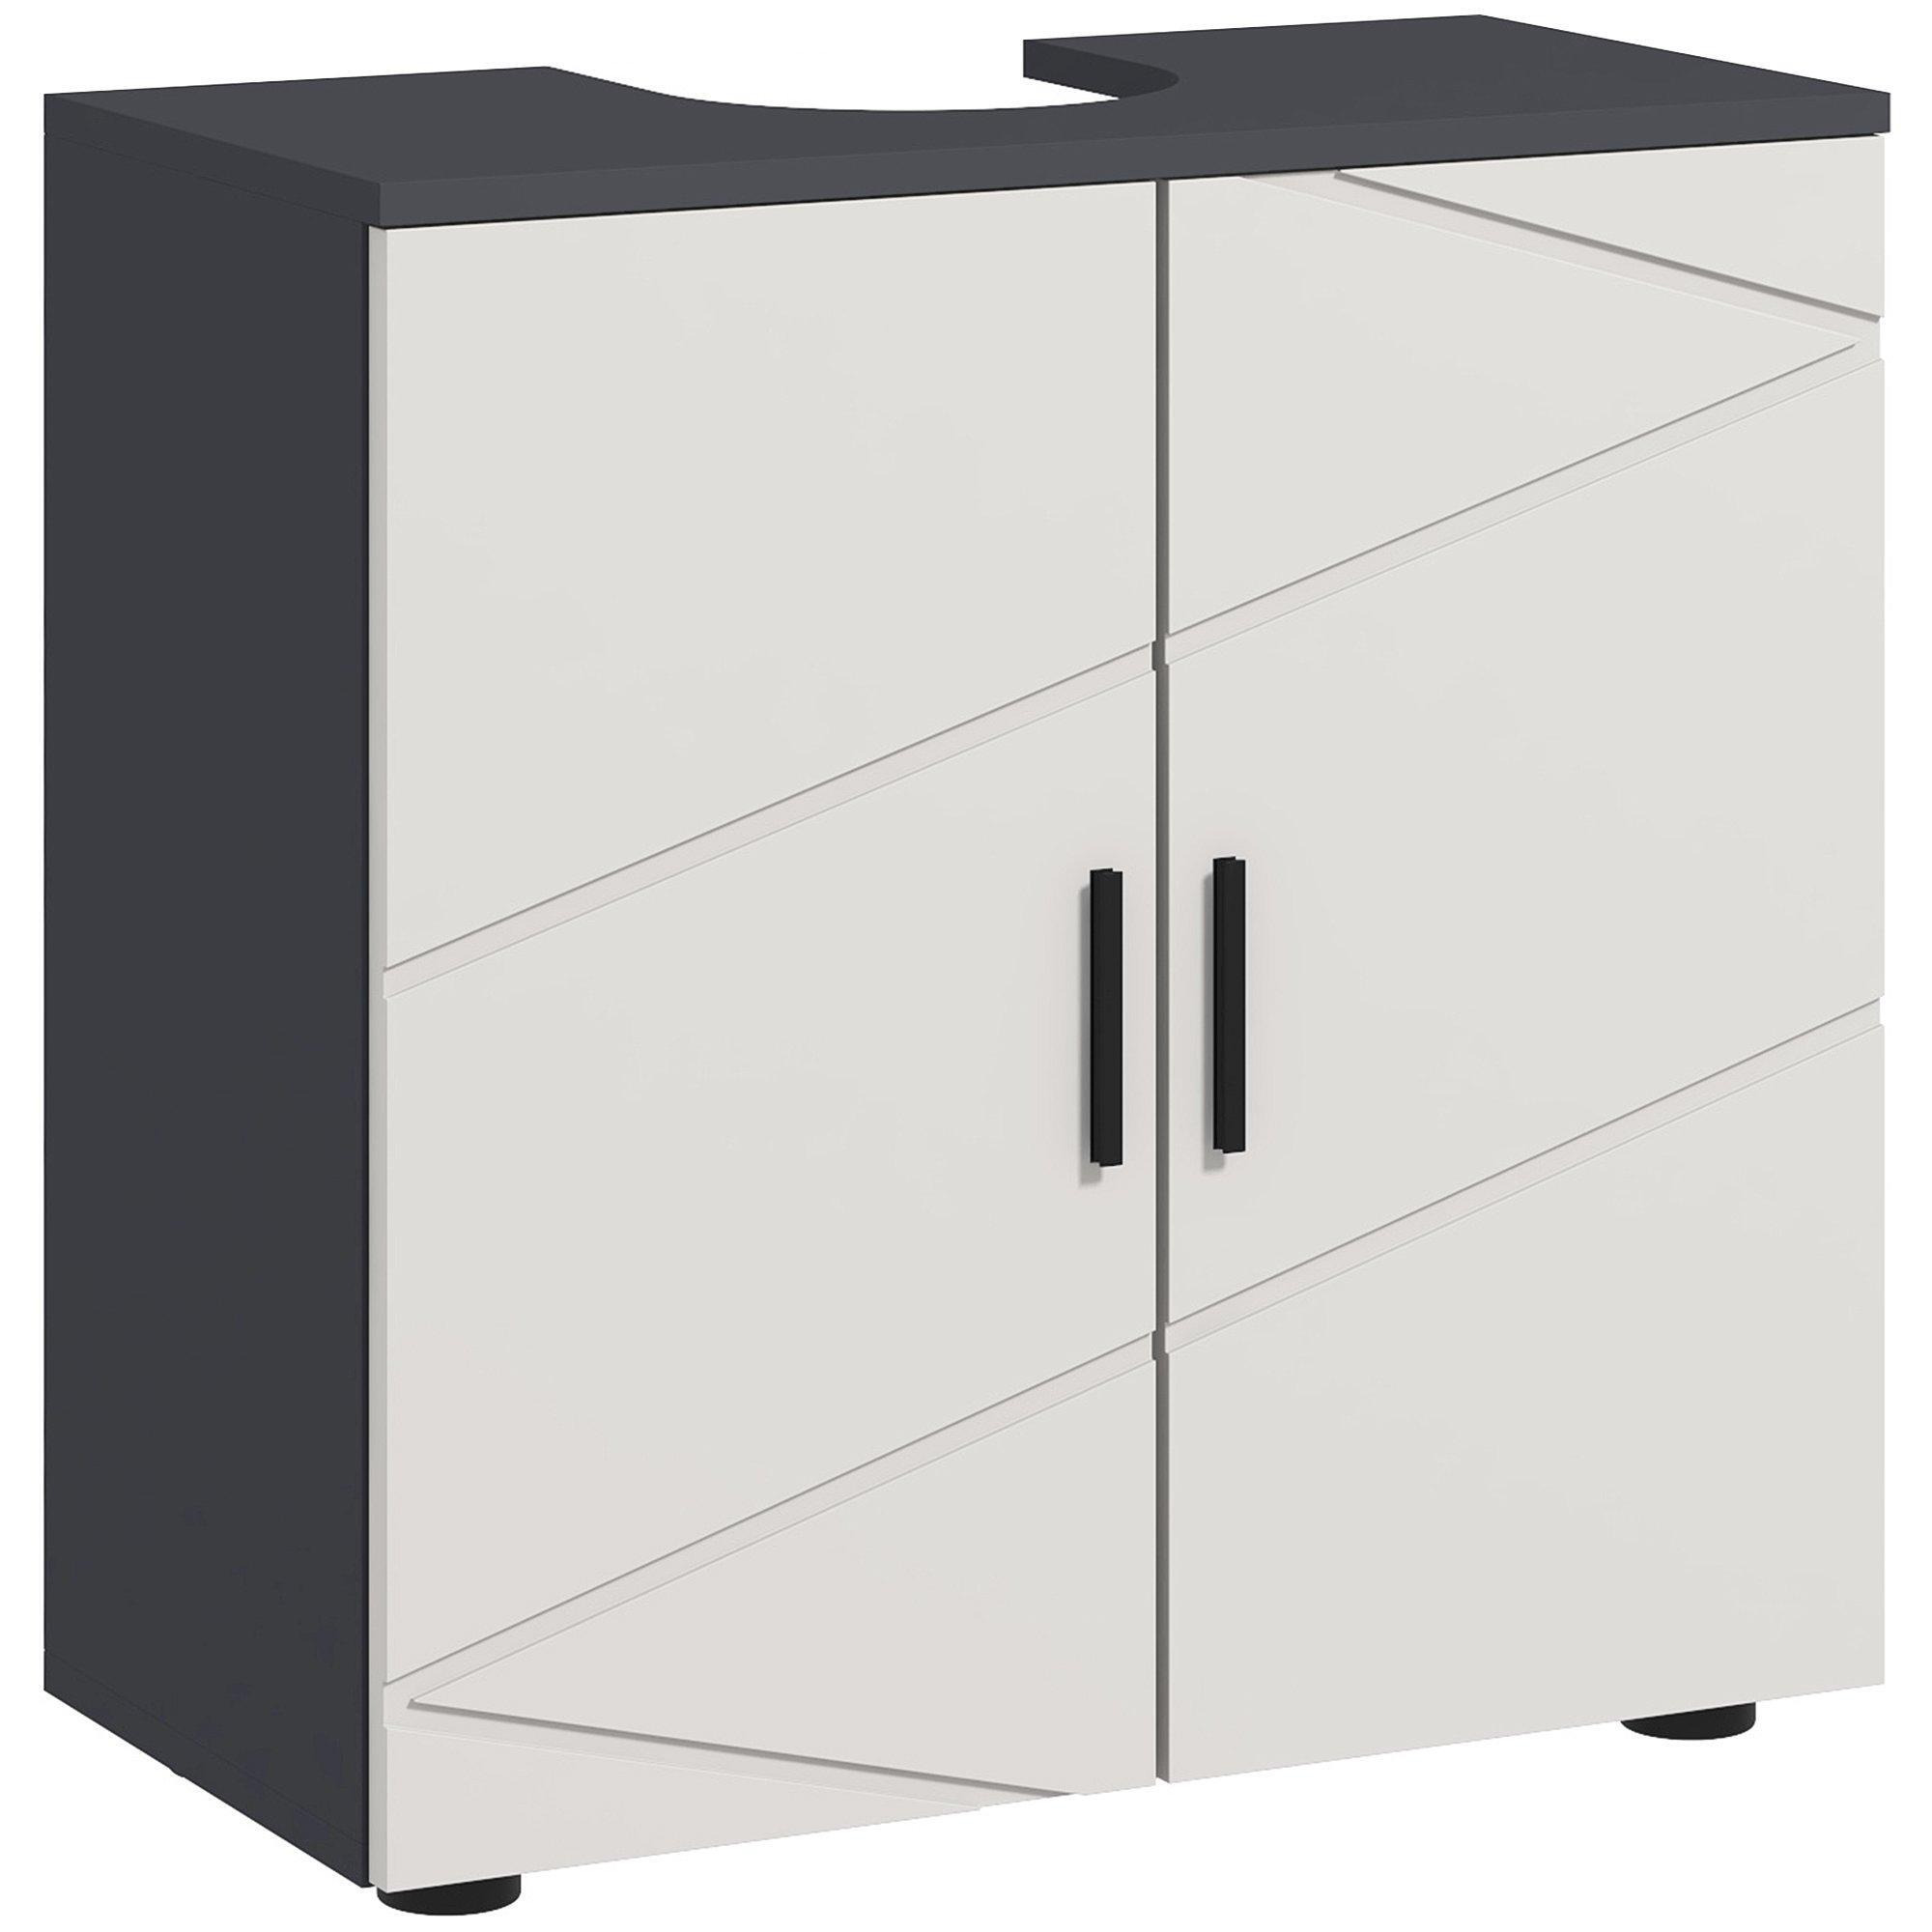 Pedestal Sink Cabinet with Double Doors and Shelf 60 x 30 x 60 cm Grey - image 1